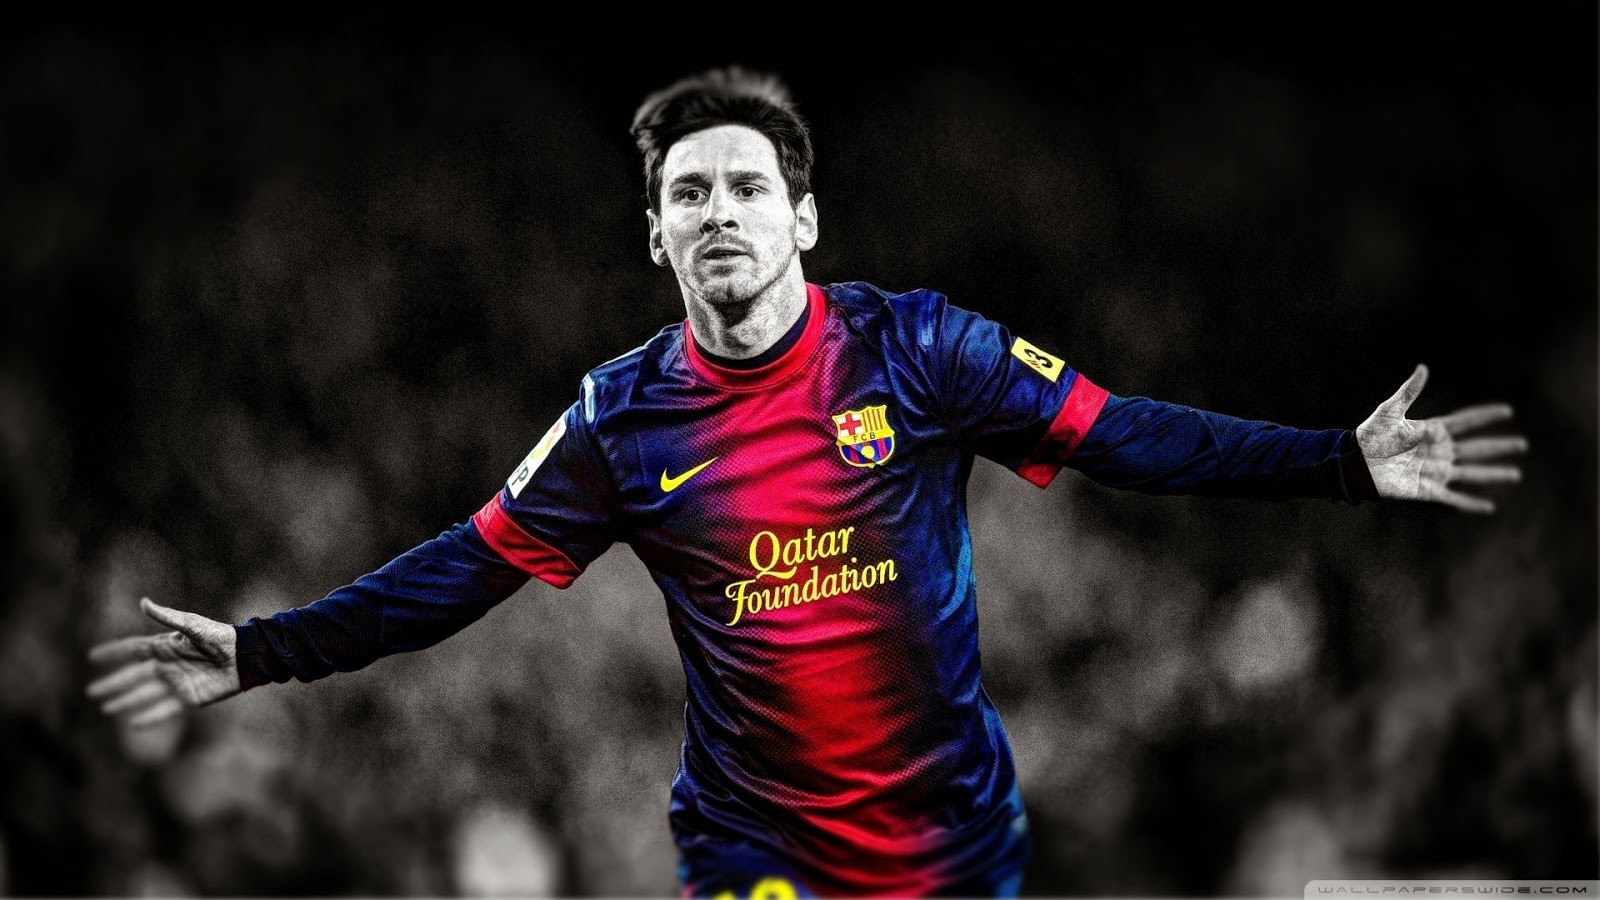  football player offering the latest wallpapers photos Messi 2015